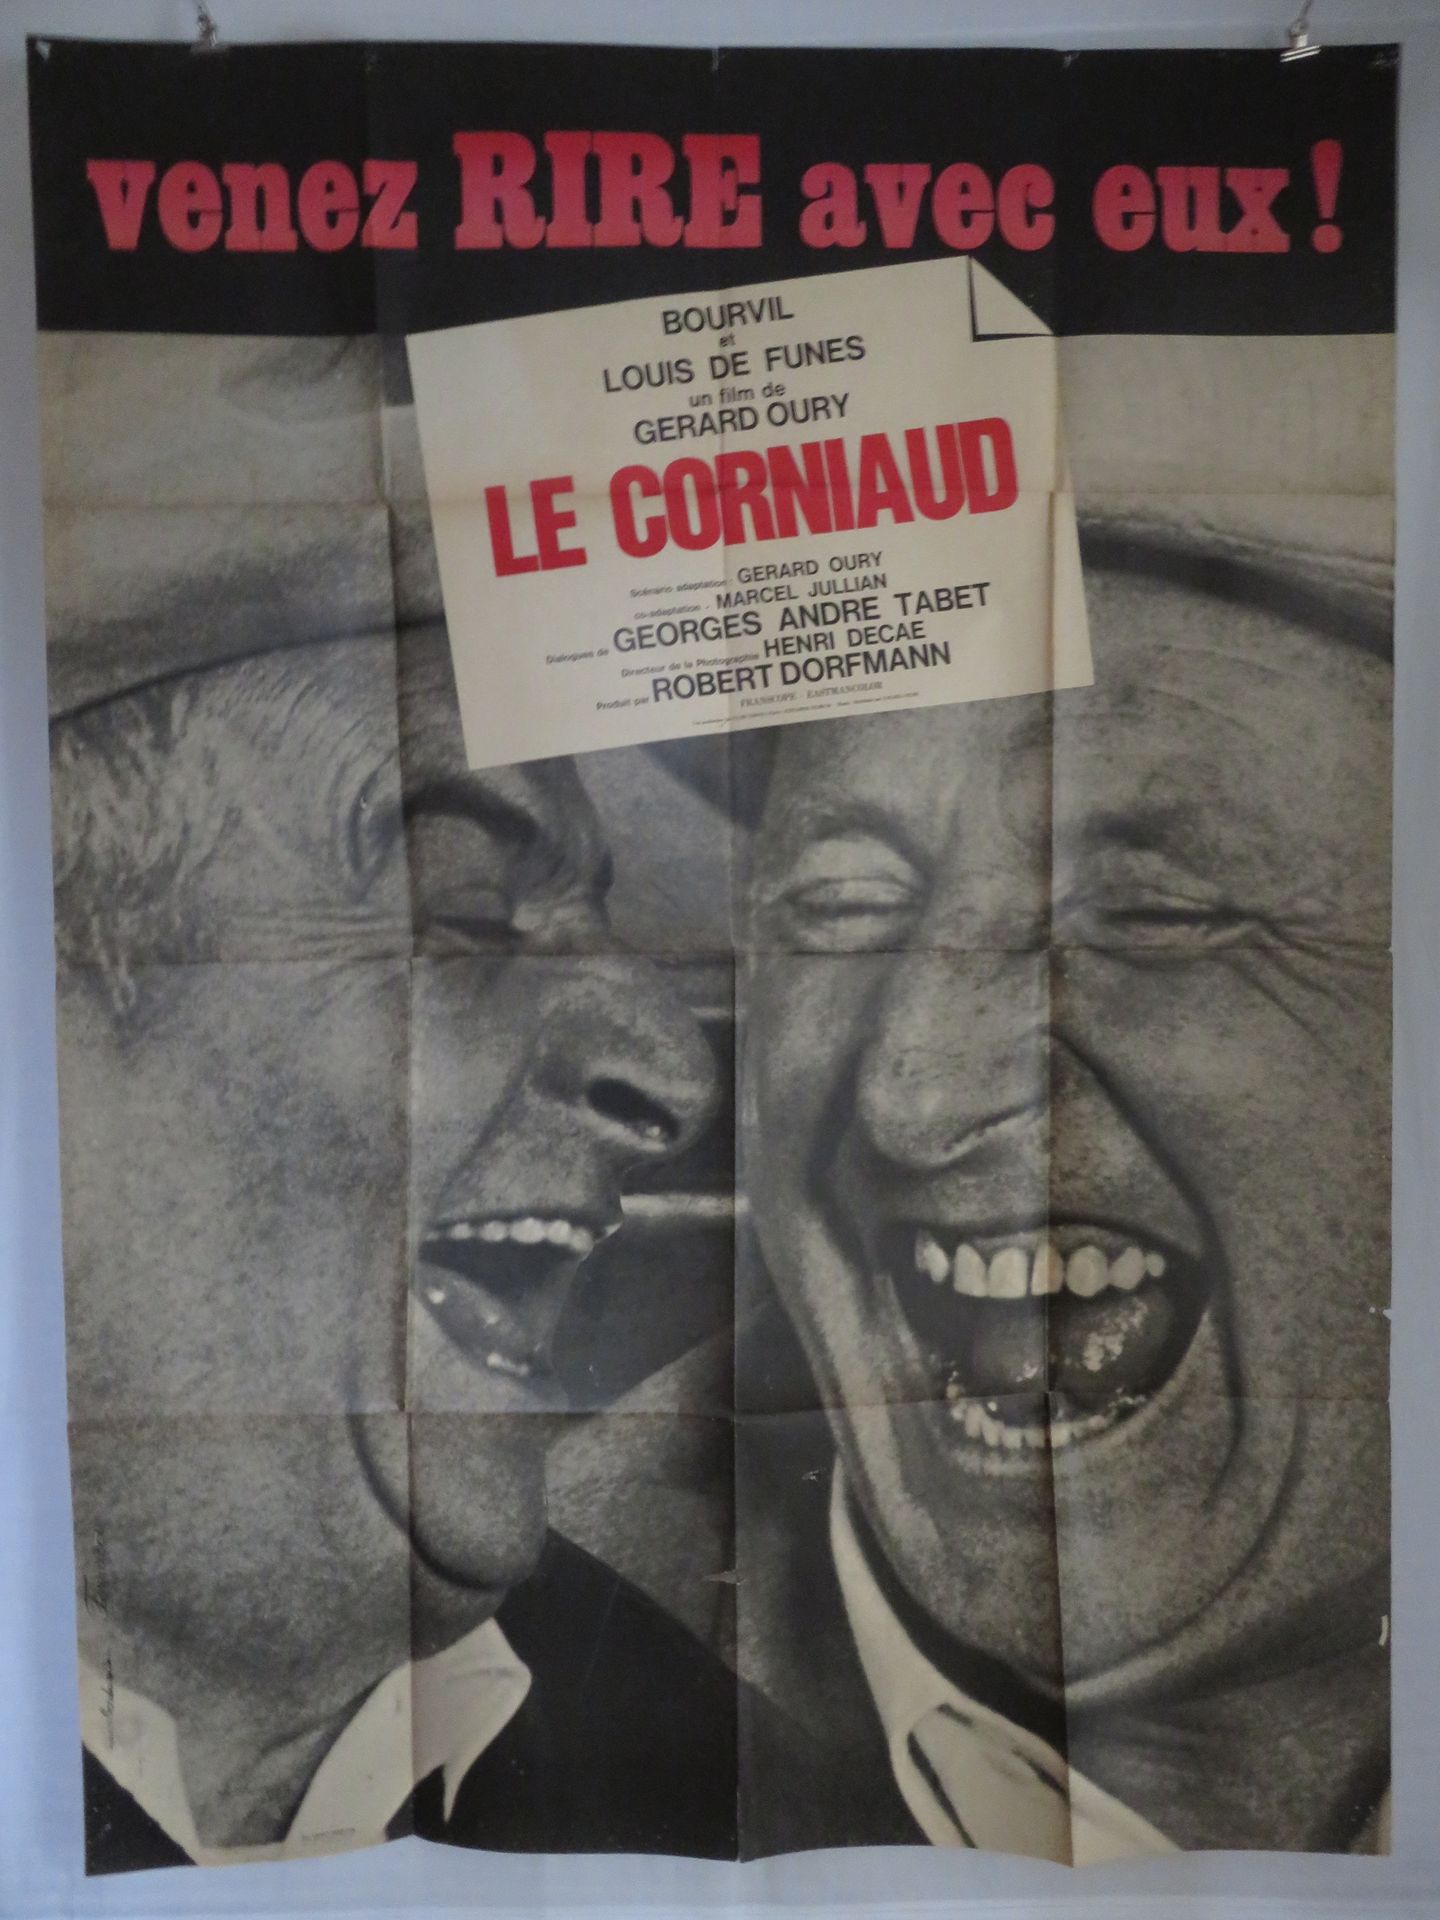 Null "LE CORNIAUD" (1964) by Gerard OURY with Louis de Funès, Bourvil - Illustra&hellip;